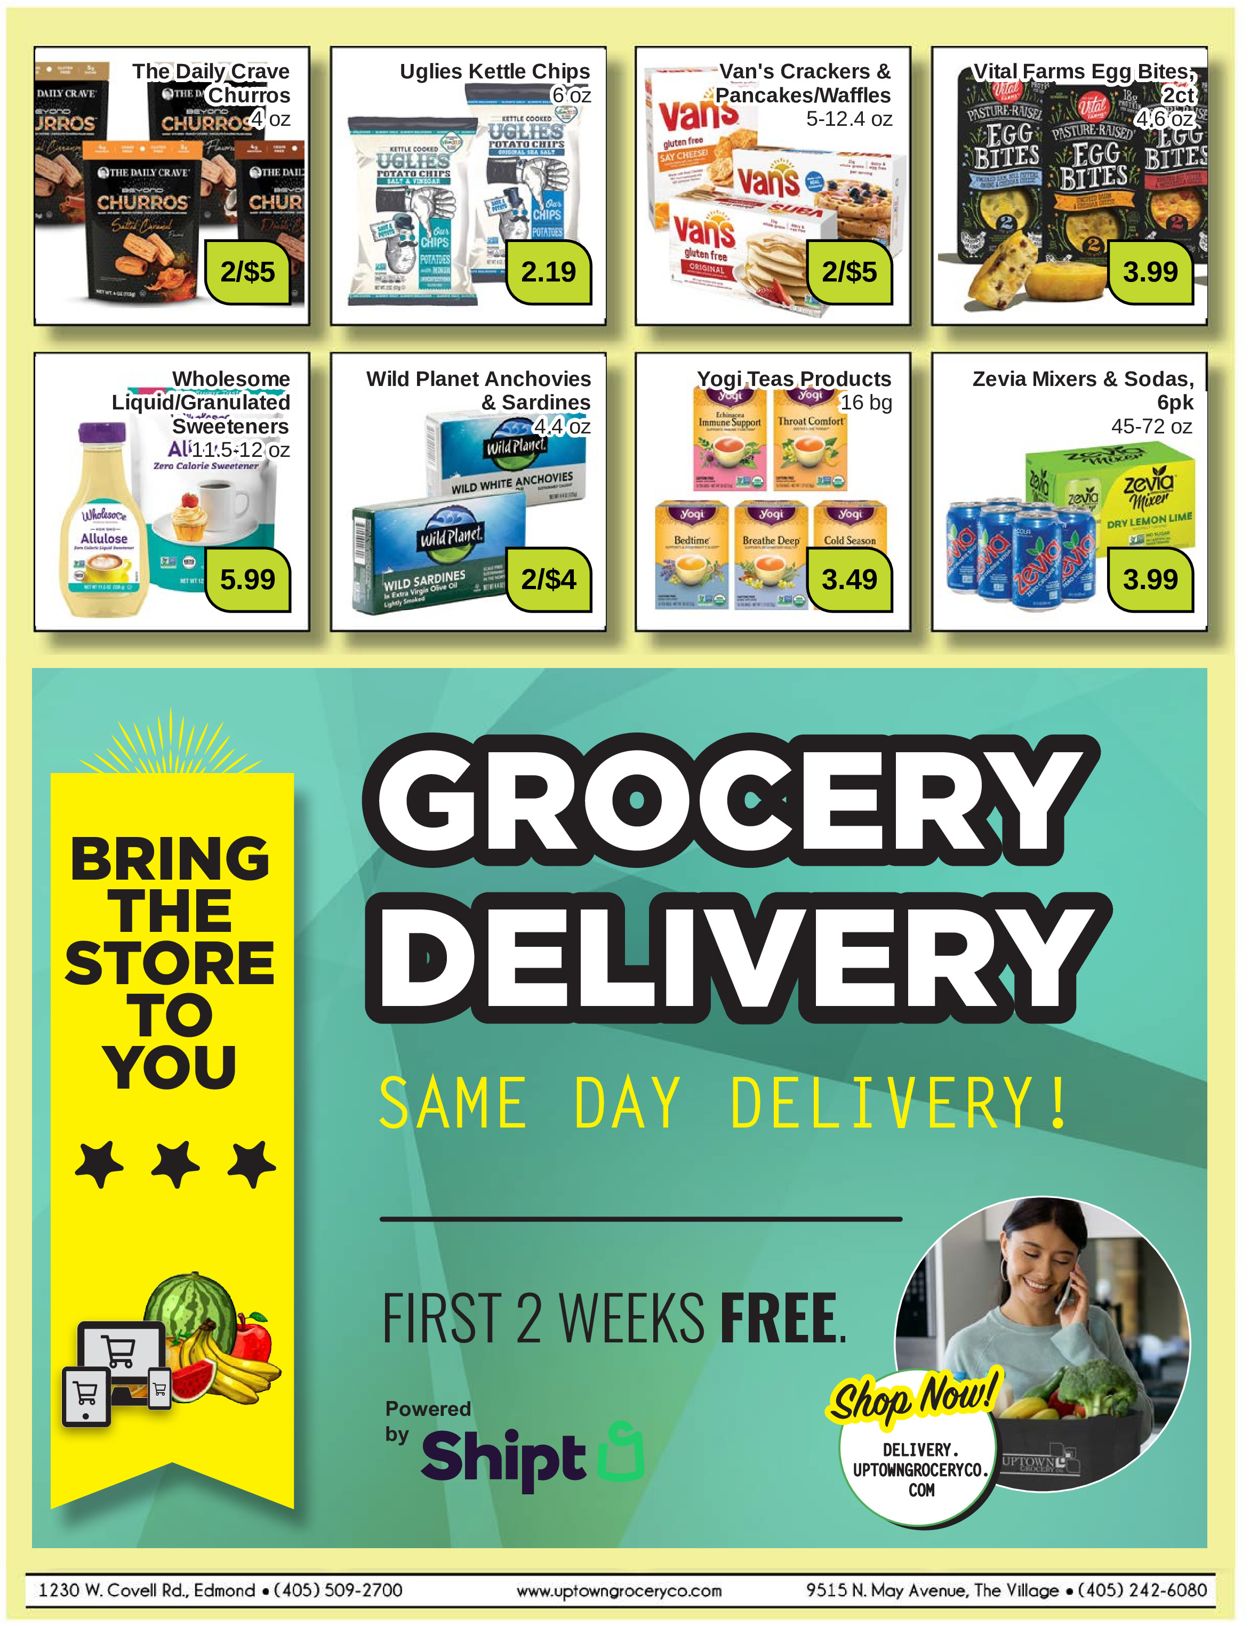 Uptown Grocery Co. Ad from 12/27/2021